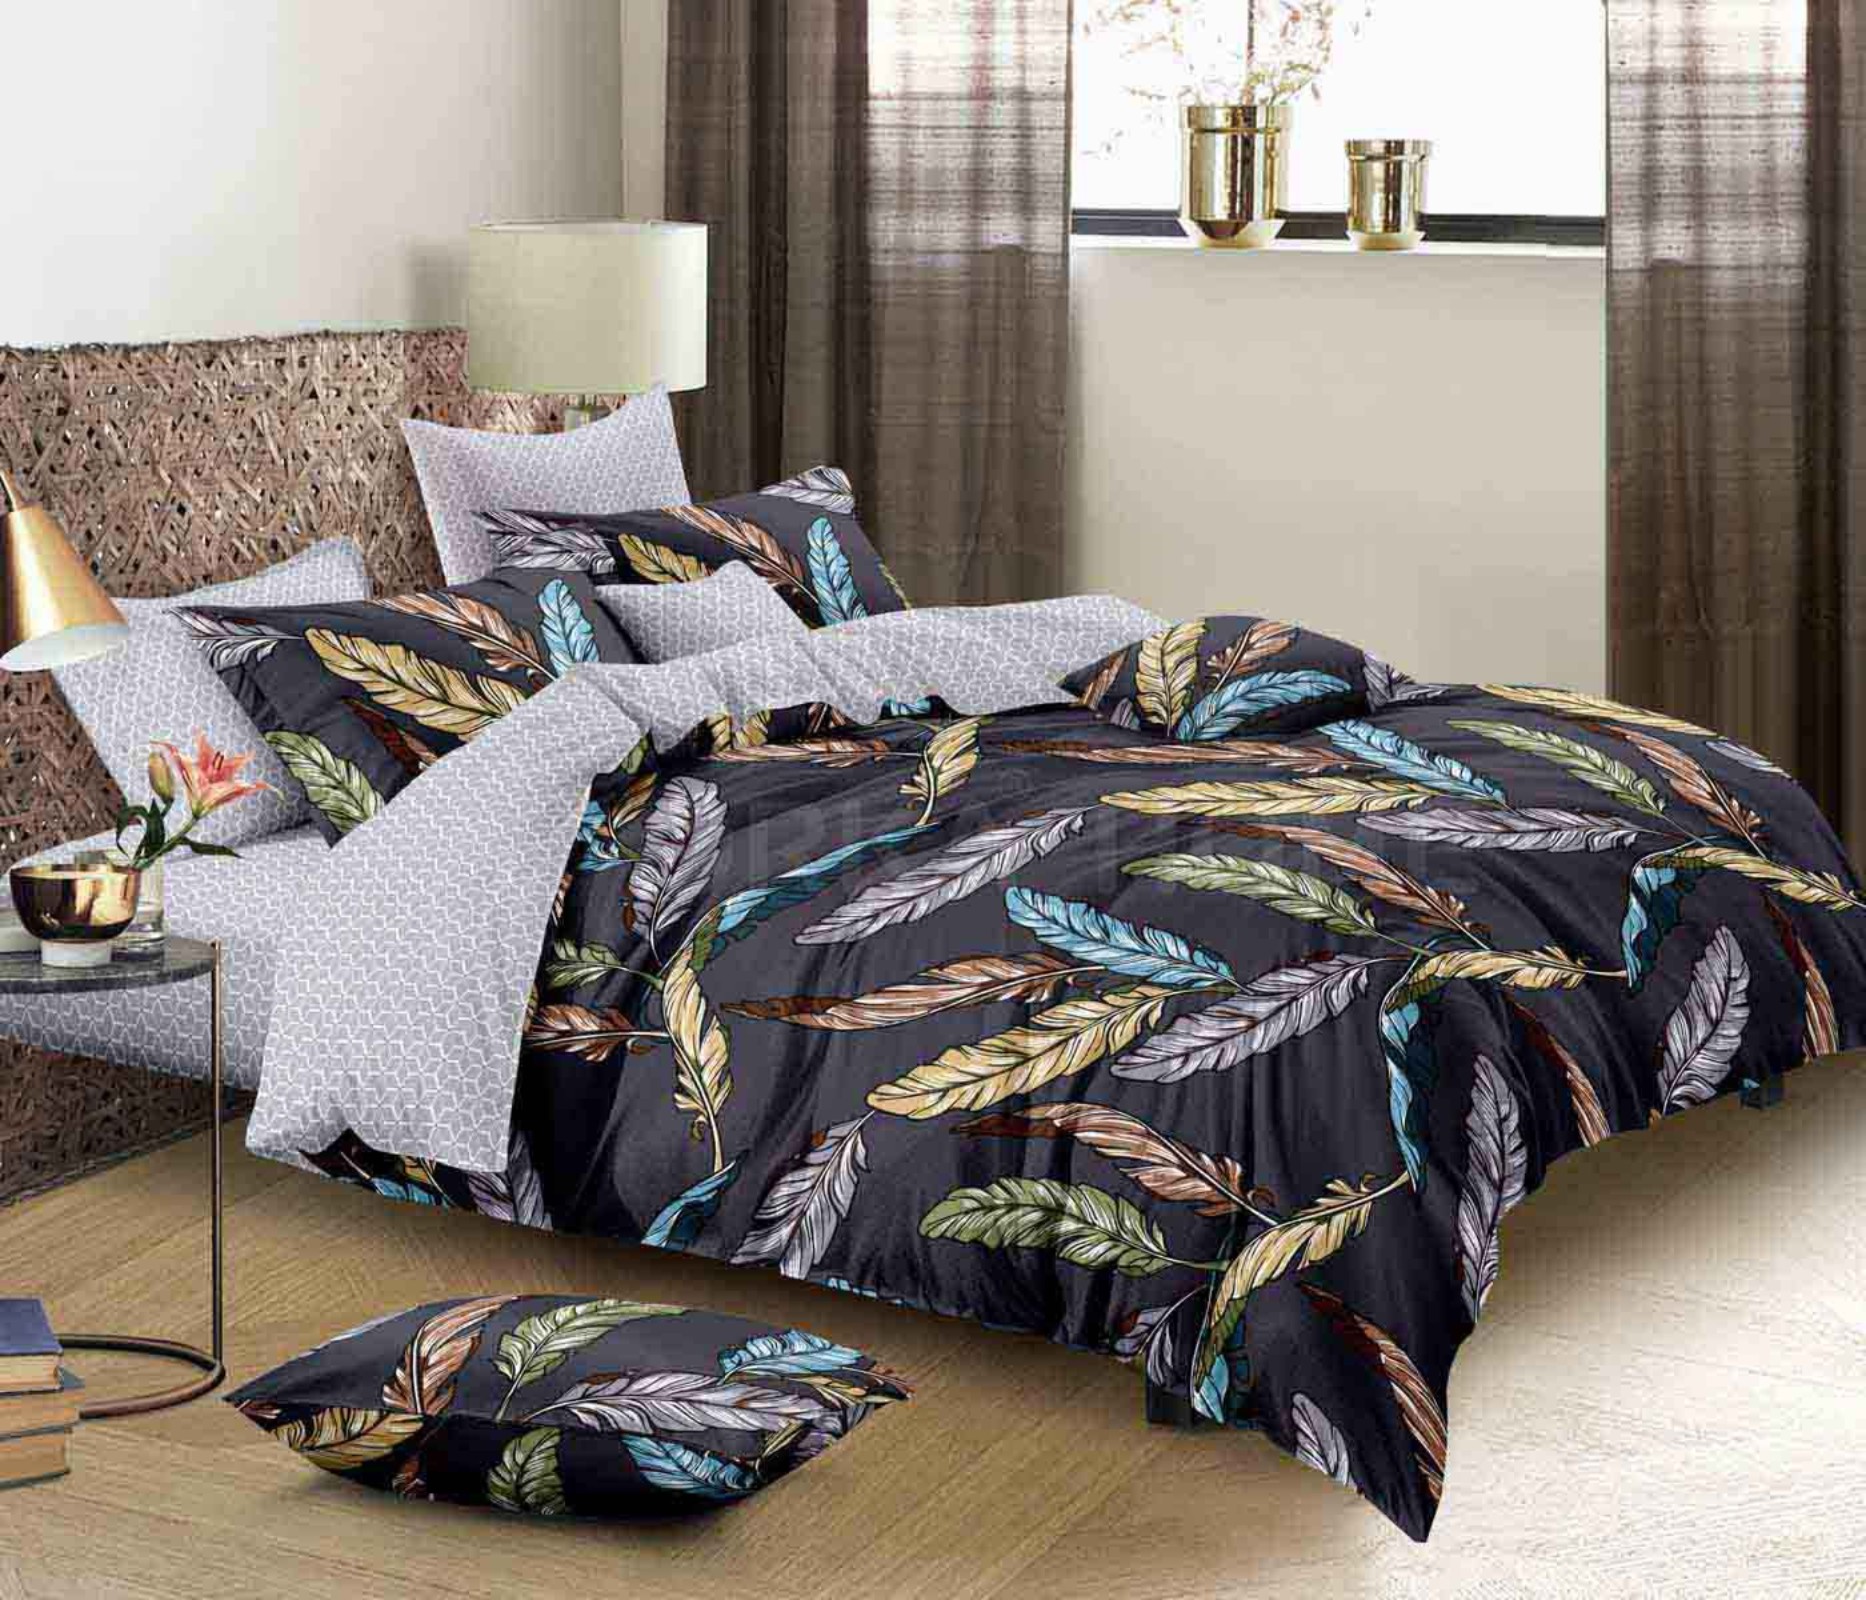 ORKA HOME Valencia King Bed Sheet Poly Cotton Printed Floral  